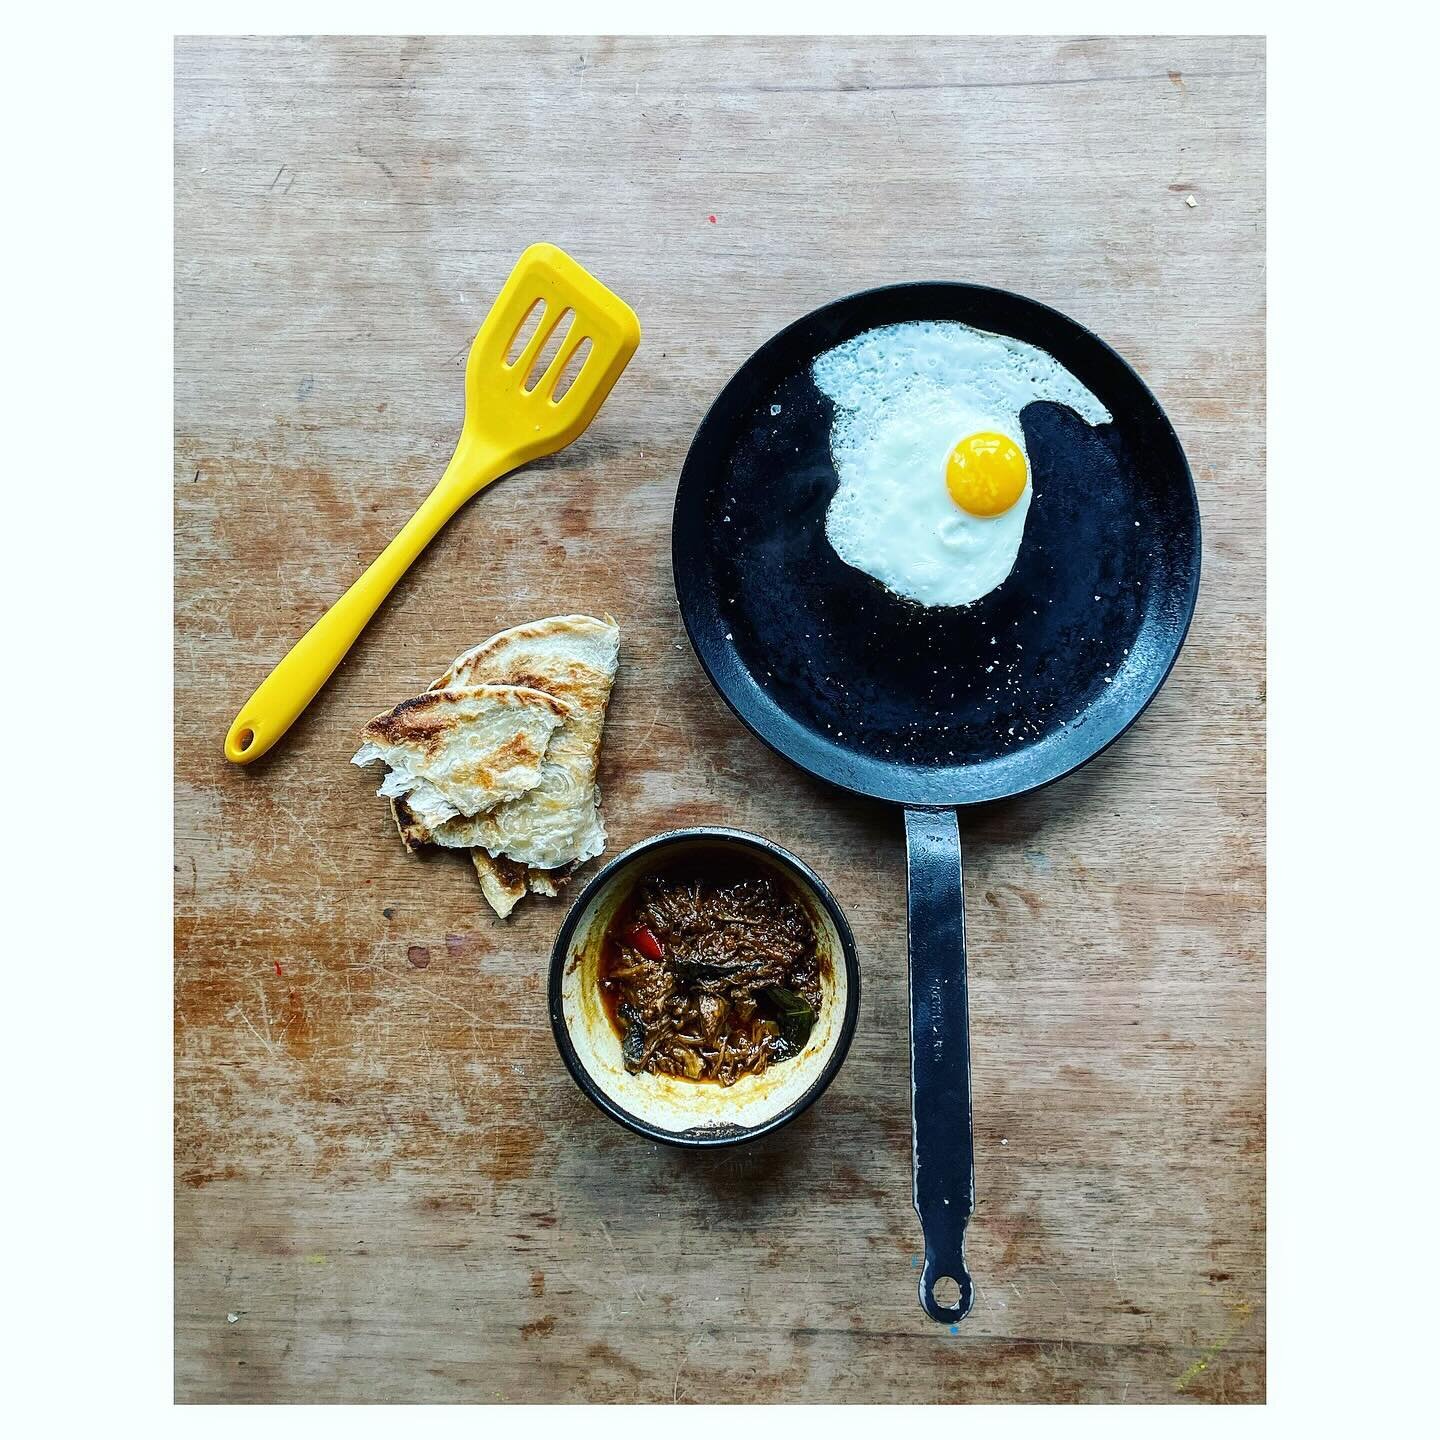 Put an egg on your rendang and eat it for breakfast 🍳 #mykitchen #breakfast #rendang #egg #paratha #chillicrunch